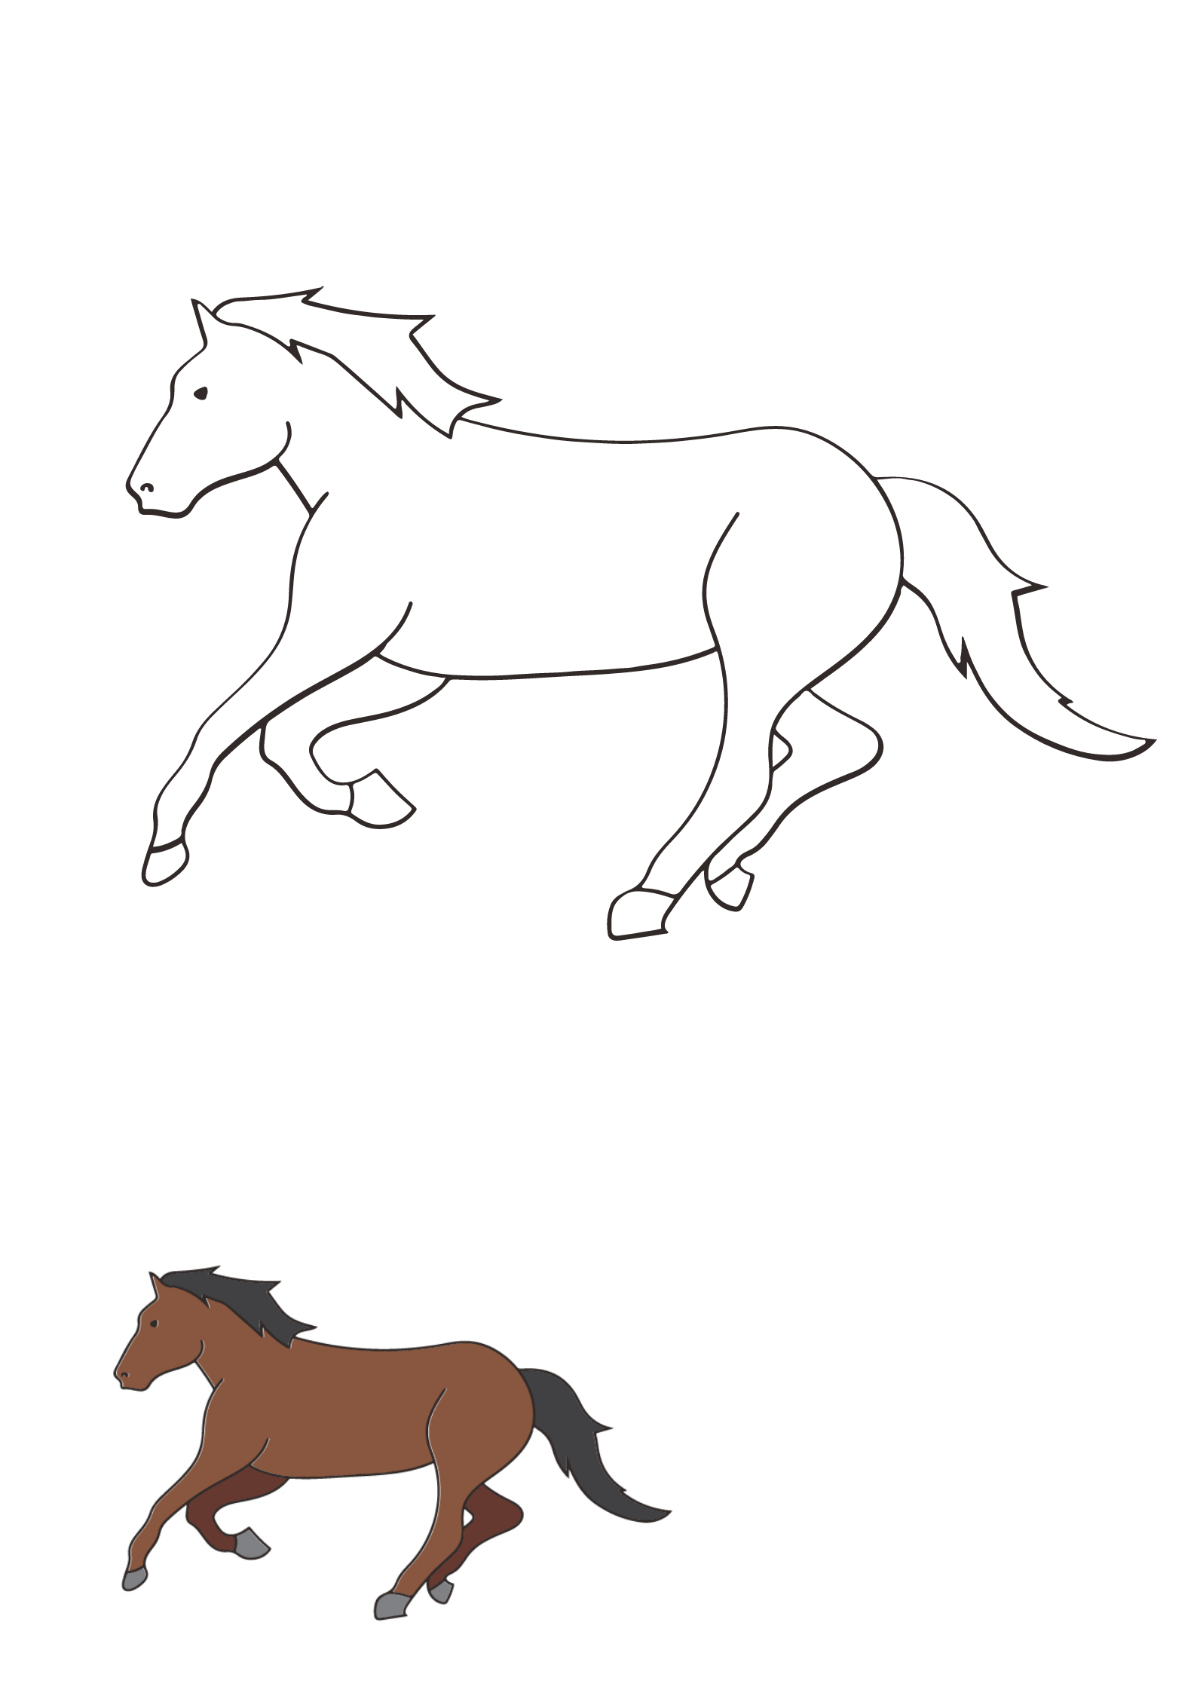 Running Horse Coloring Page Template